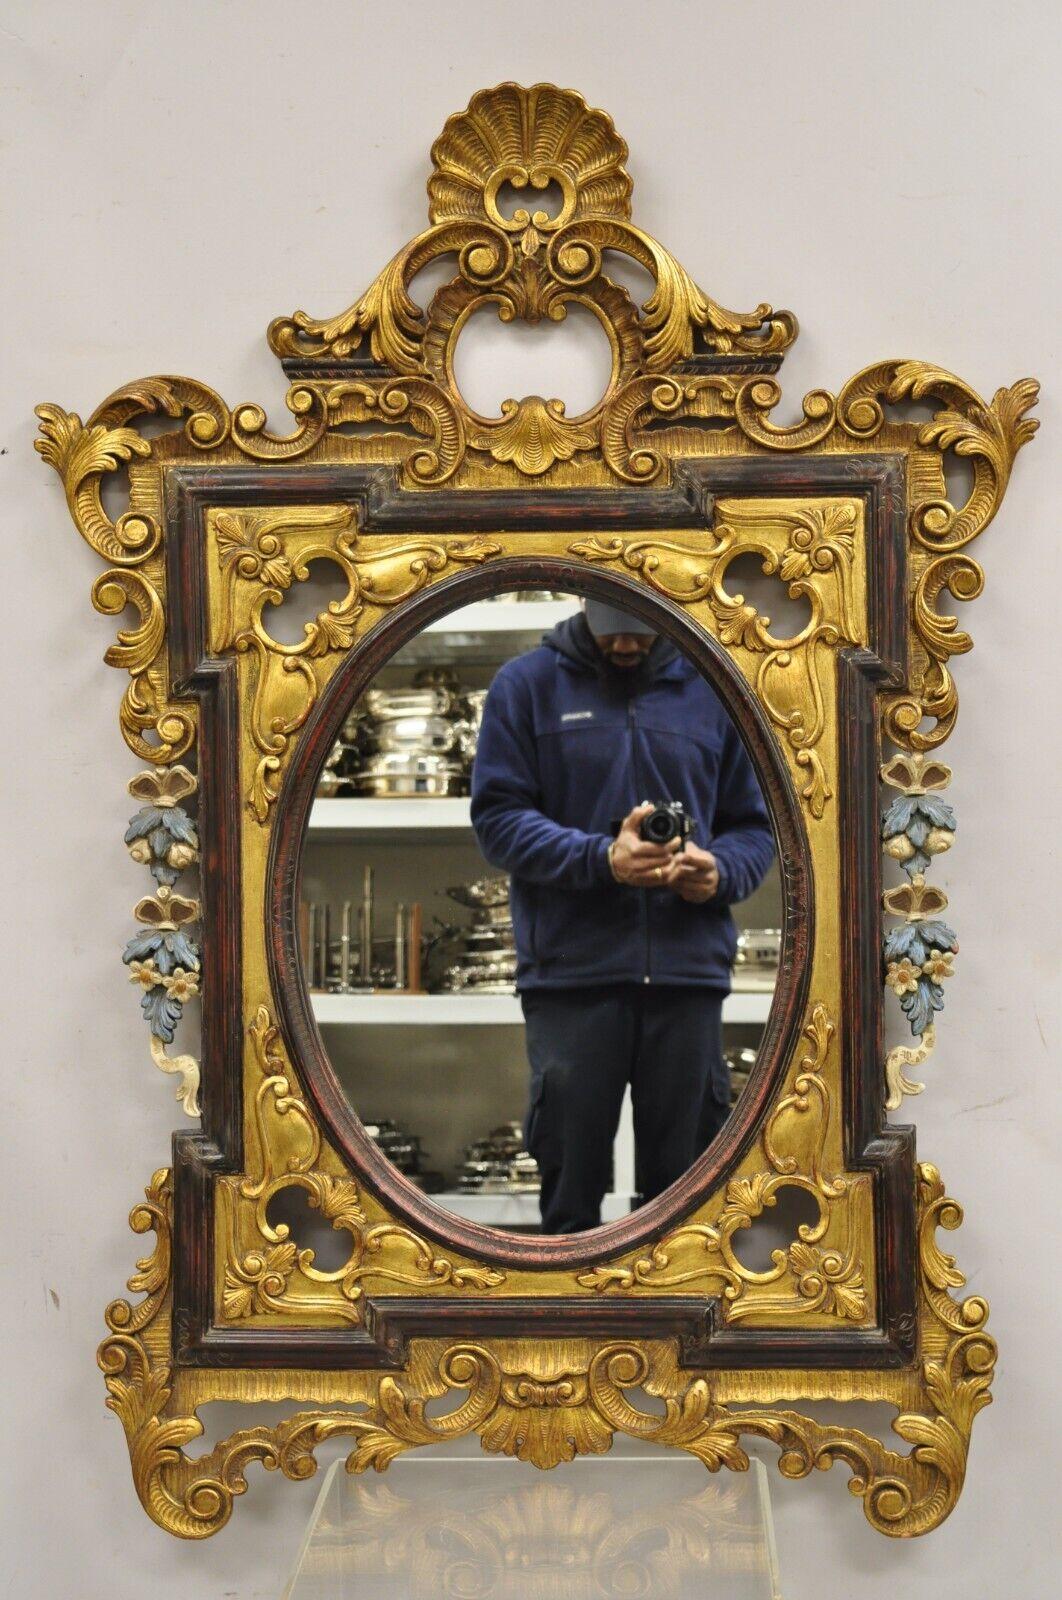 Vintage French Rococo Style Gold Gilt Scroll Carved Wood Italian Wall Mirror. Item features  Blue and white painted floral carvings, nicely carved wooden frame, distressed finish, very nice vintage mirror. Circa Mid to Late 20th Century.